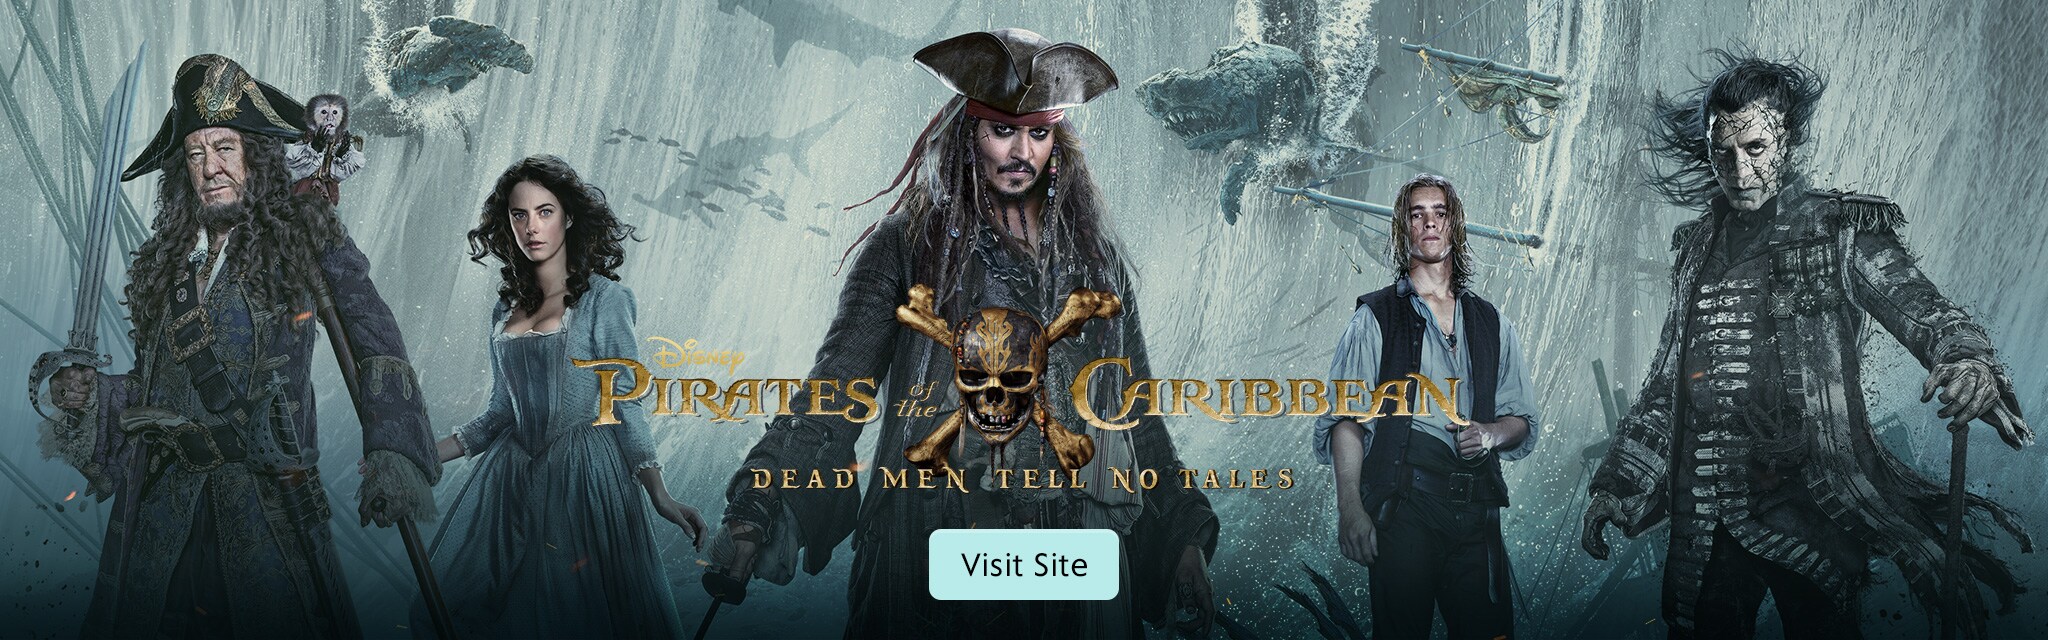 pirates of the caribbean movies